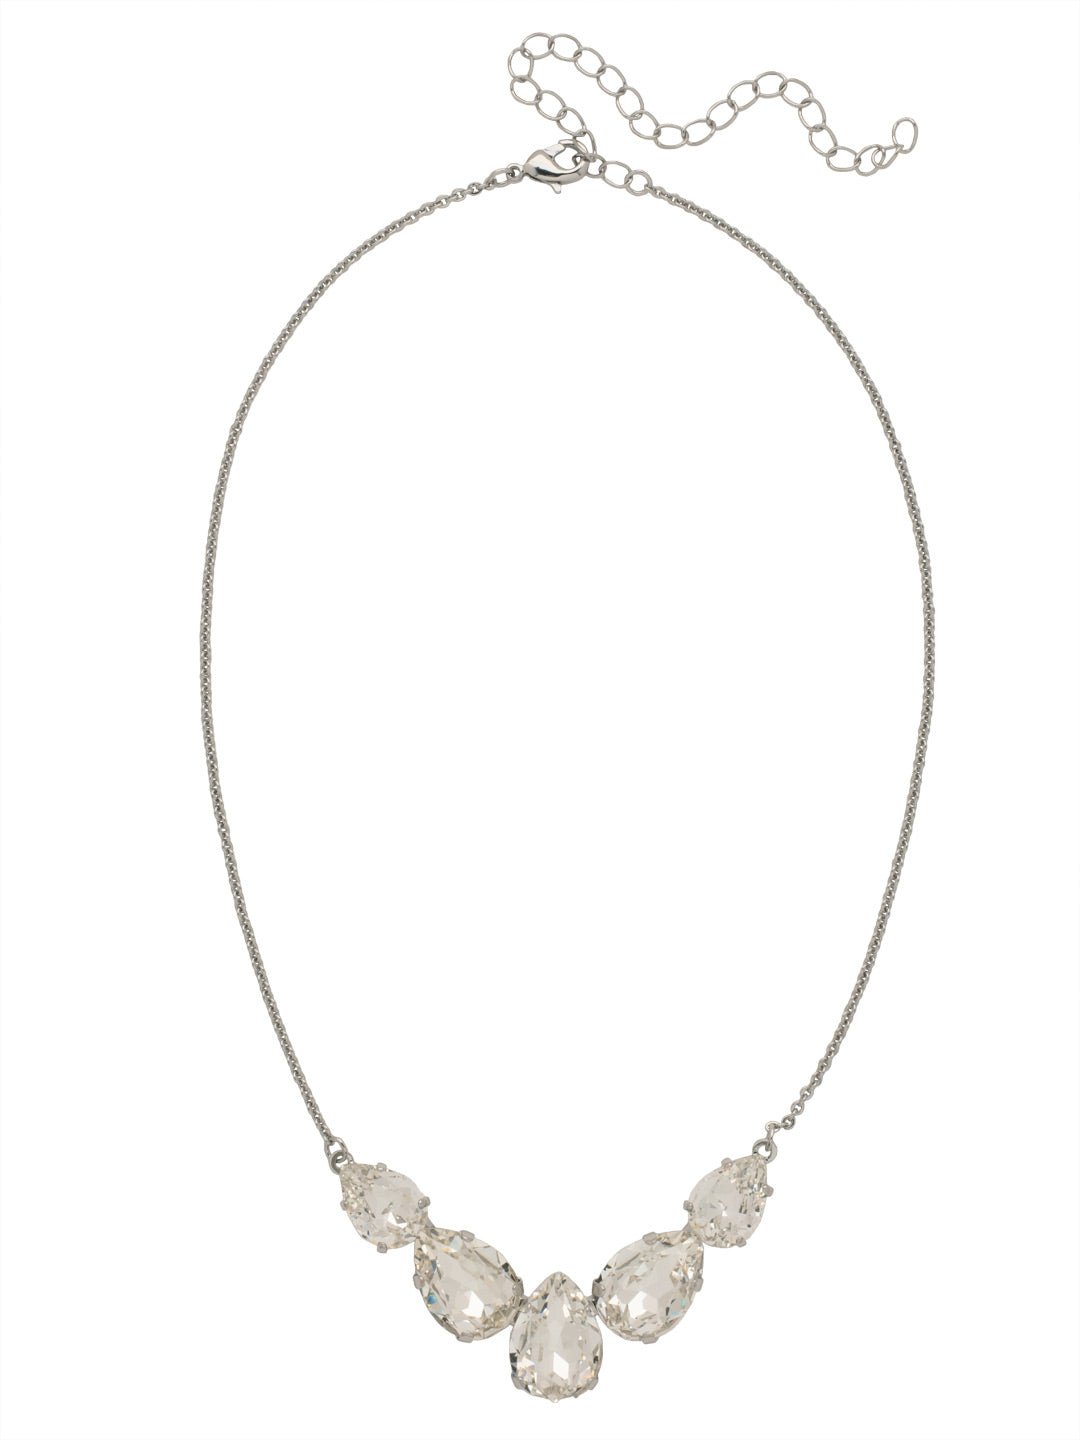 Hana Tennis Necklace - NFH12PDCRY - <p>The Hana Tennis Necklace features chunky pear cut crystals positioned on an adjustable chain, secured with a lobster claw clasp. From Sorrelli's Crystal collection in our Palladium finish.</p>